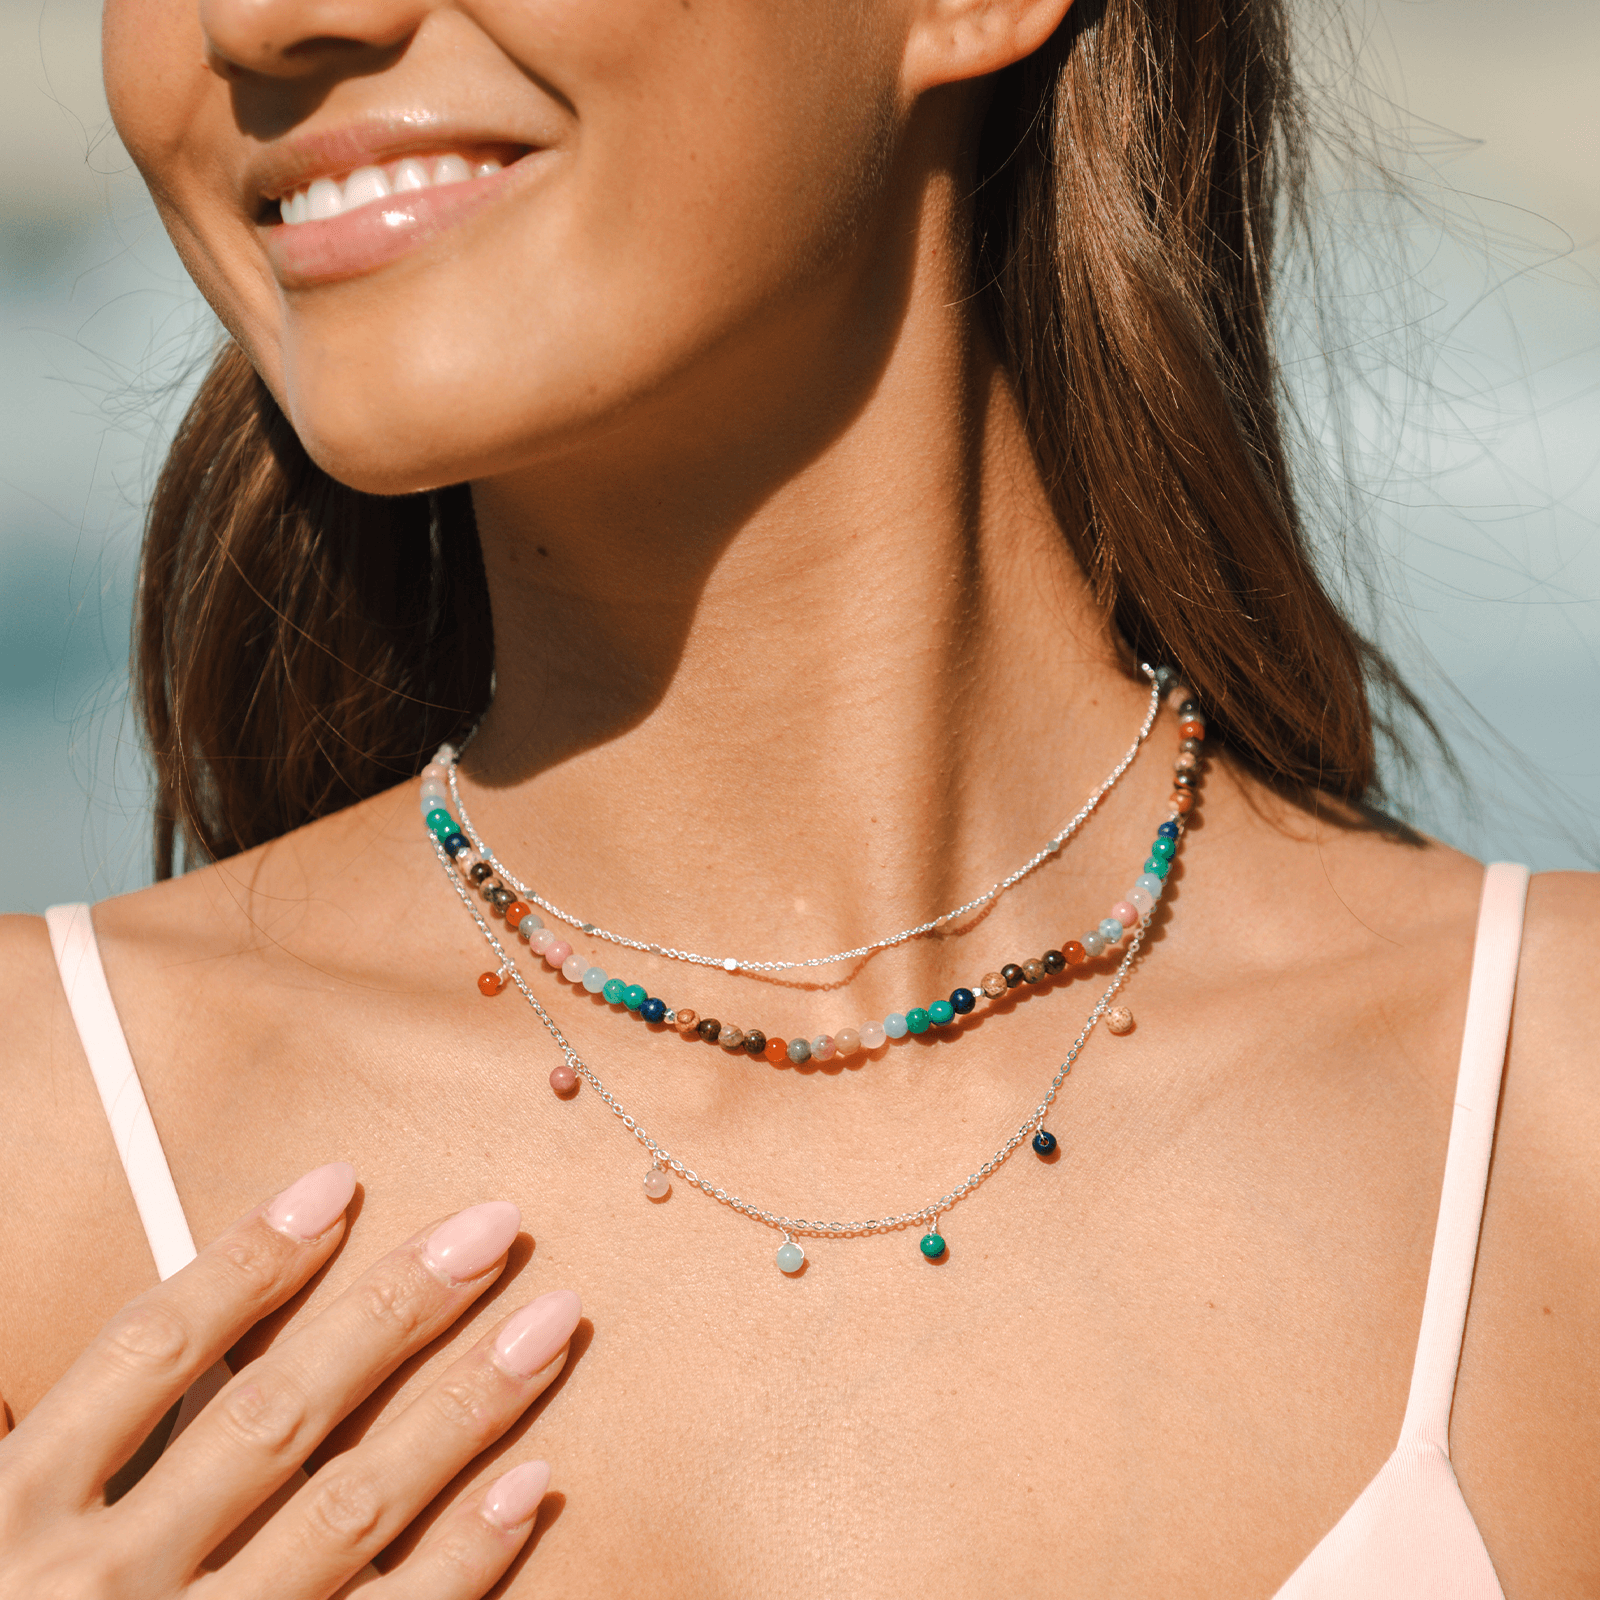 Model wearing a three necklace stack. One is a dewdrop charm style with multicolored beads and a silver chain, the other is a 4mm multicolor bead necklace and the last is a dainty gold chain necklace